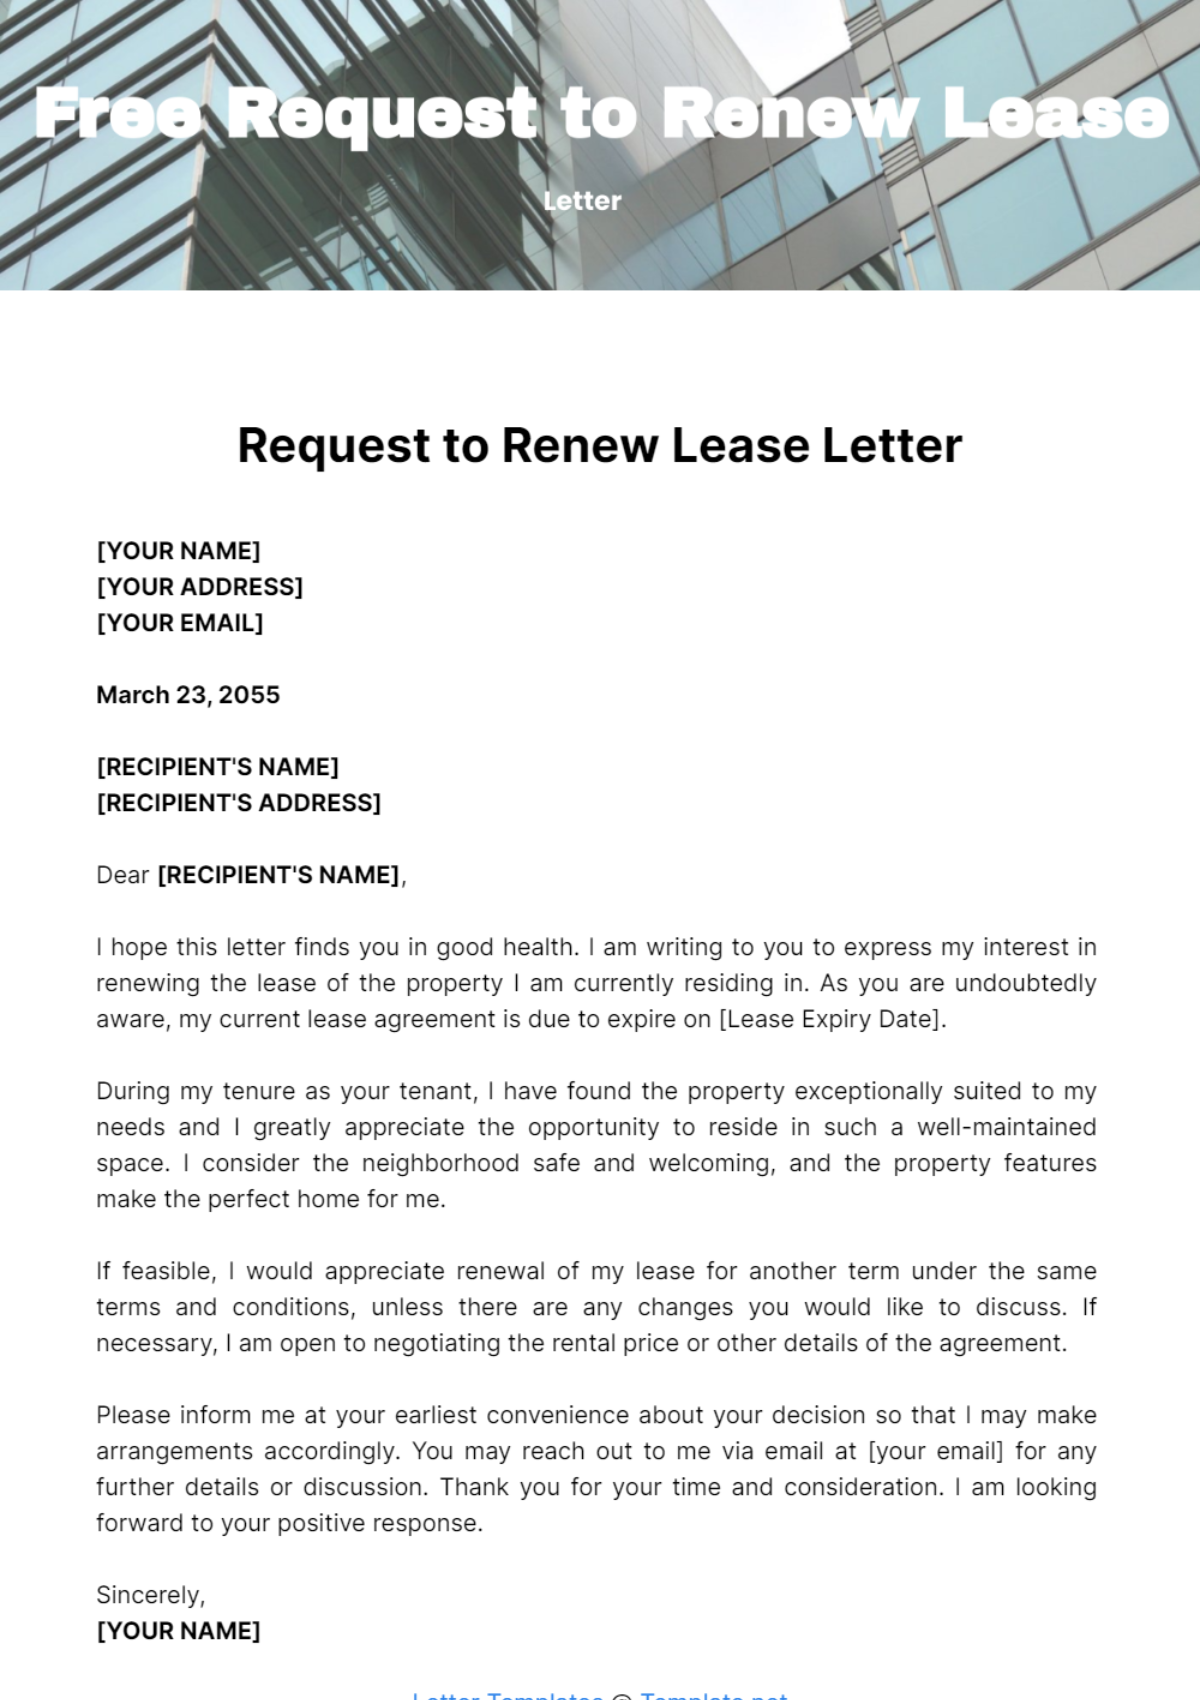 Free Request to Renew Lease Letter Template